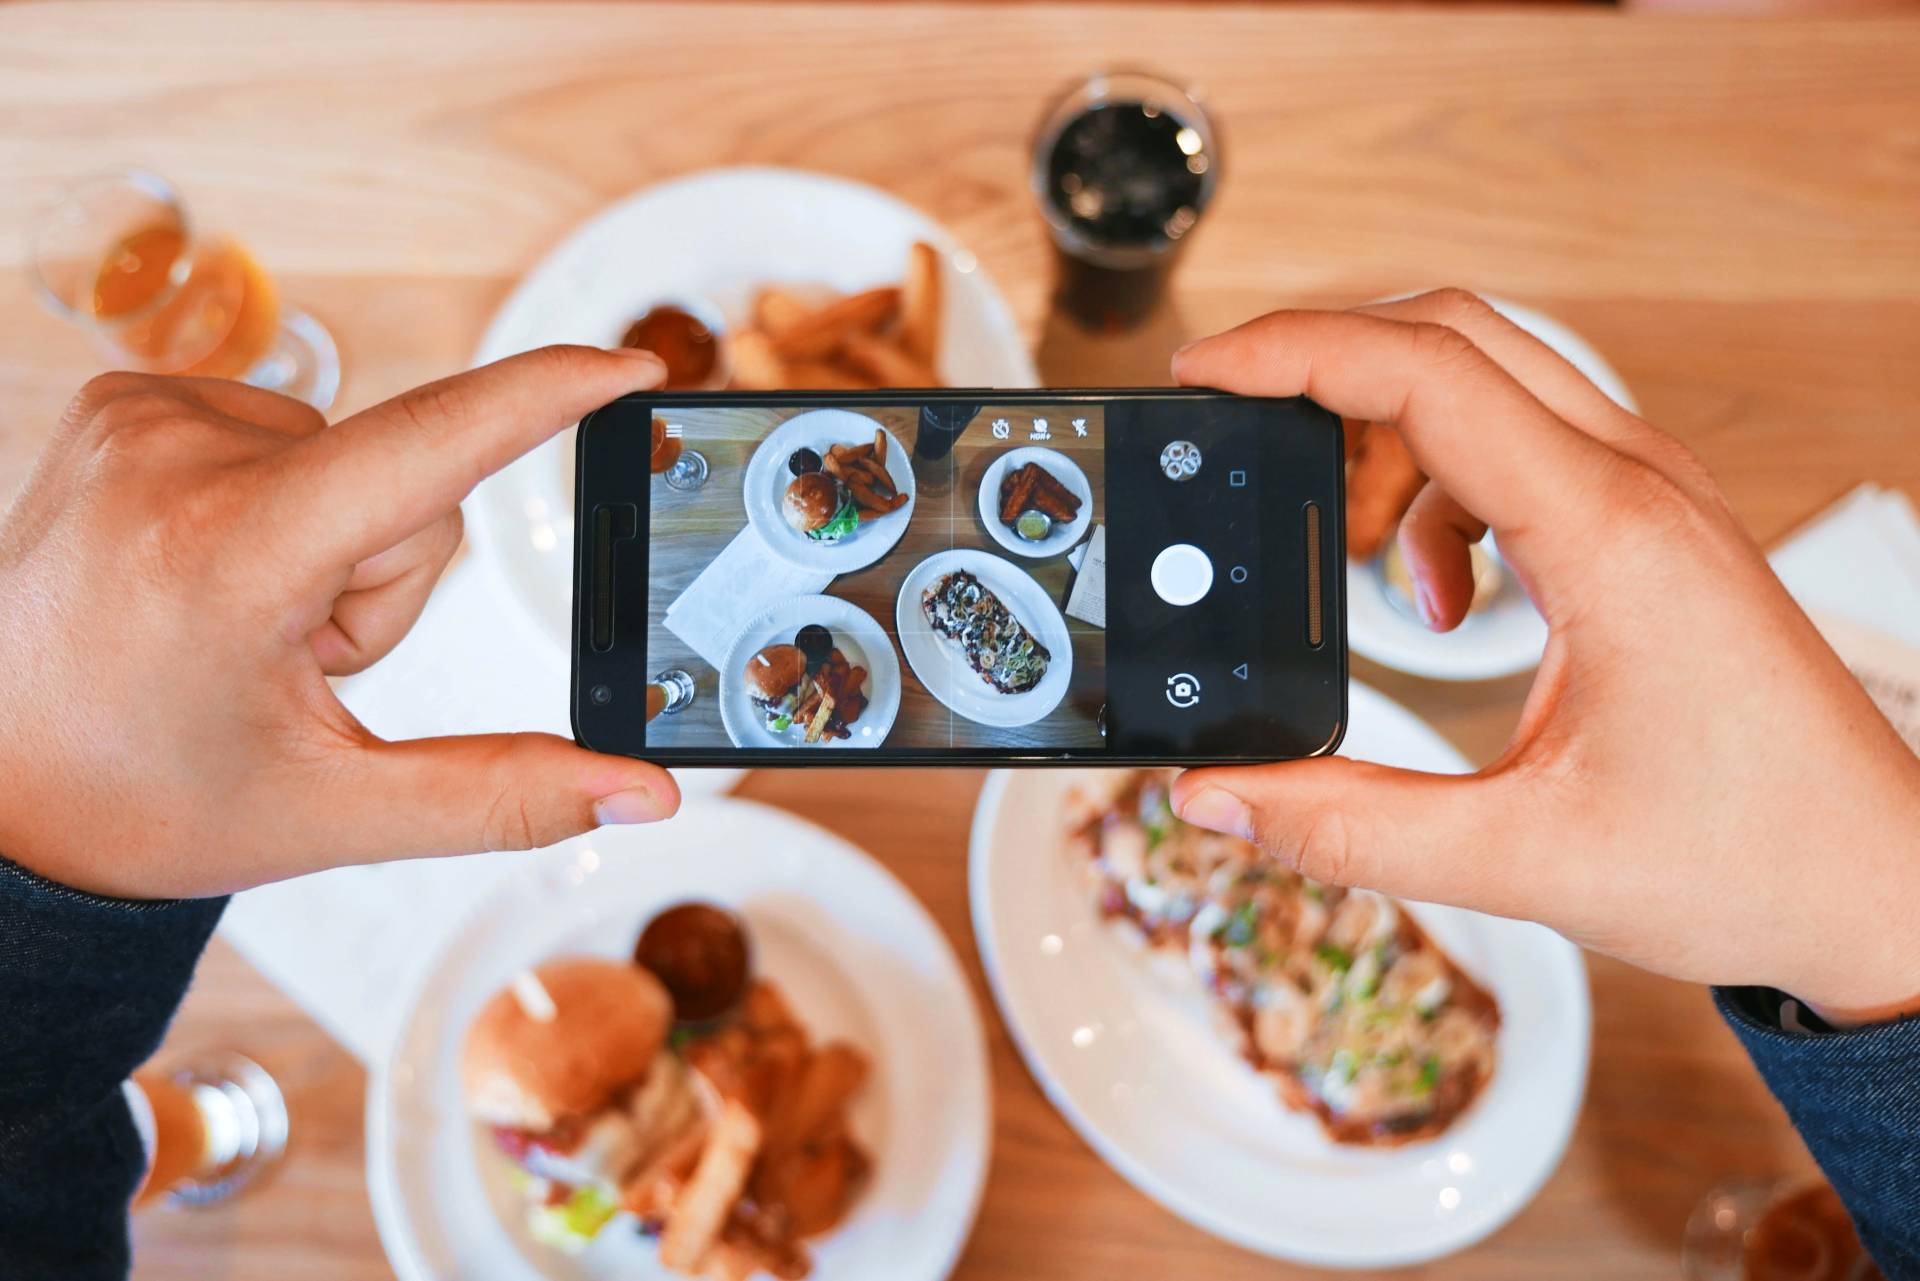 With over a billion users, Instagram is a marketing tool your business can ill afford to ignore.